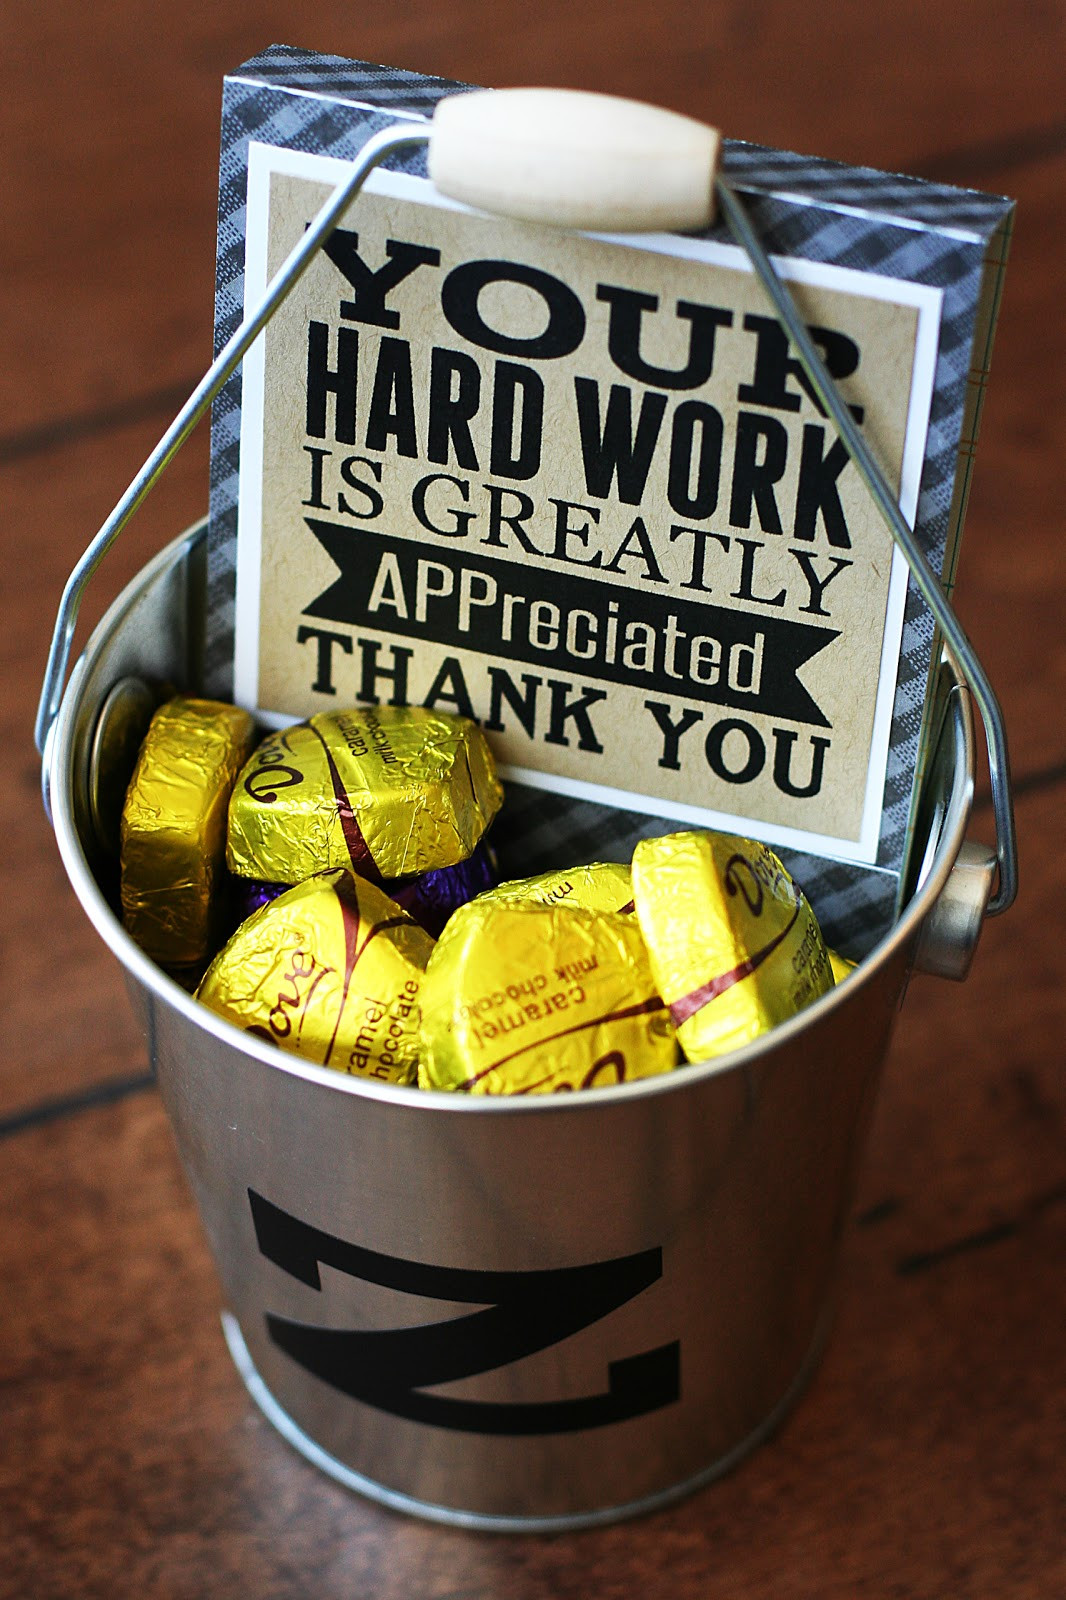 The Best Ideas for Employee Thank You Gift Ideas Home, Family, Style